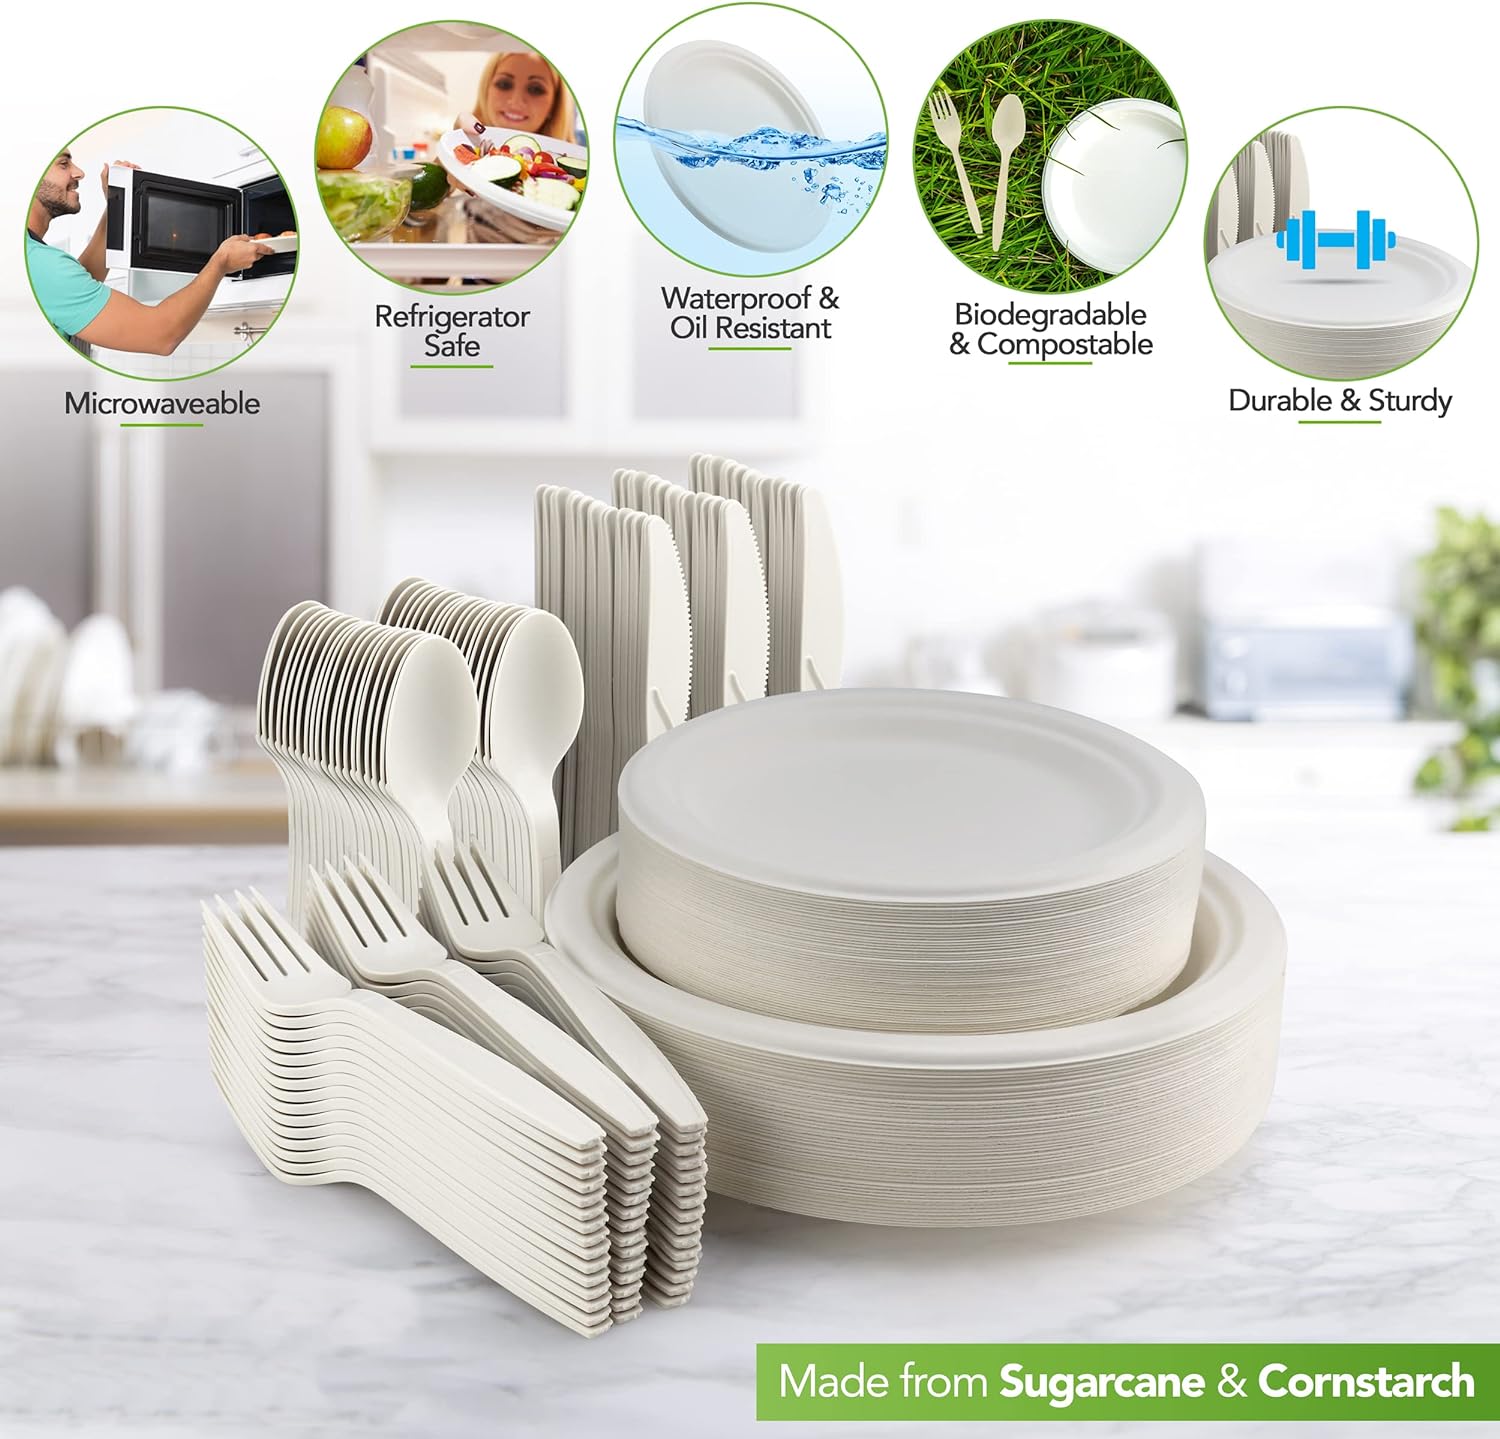 350pcs Compostable Paper Plates Set Eco-friendly Disposable Paper Plates  Cutlery Includes Biodegradable Plates, Forks, Knives, Spoons, Cups and  Straws